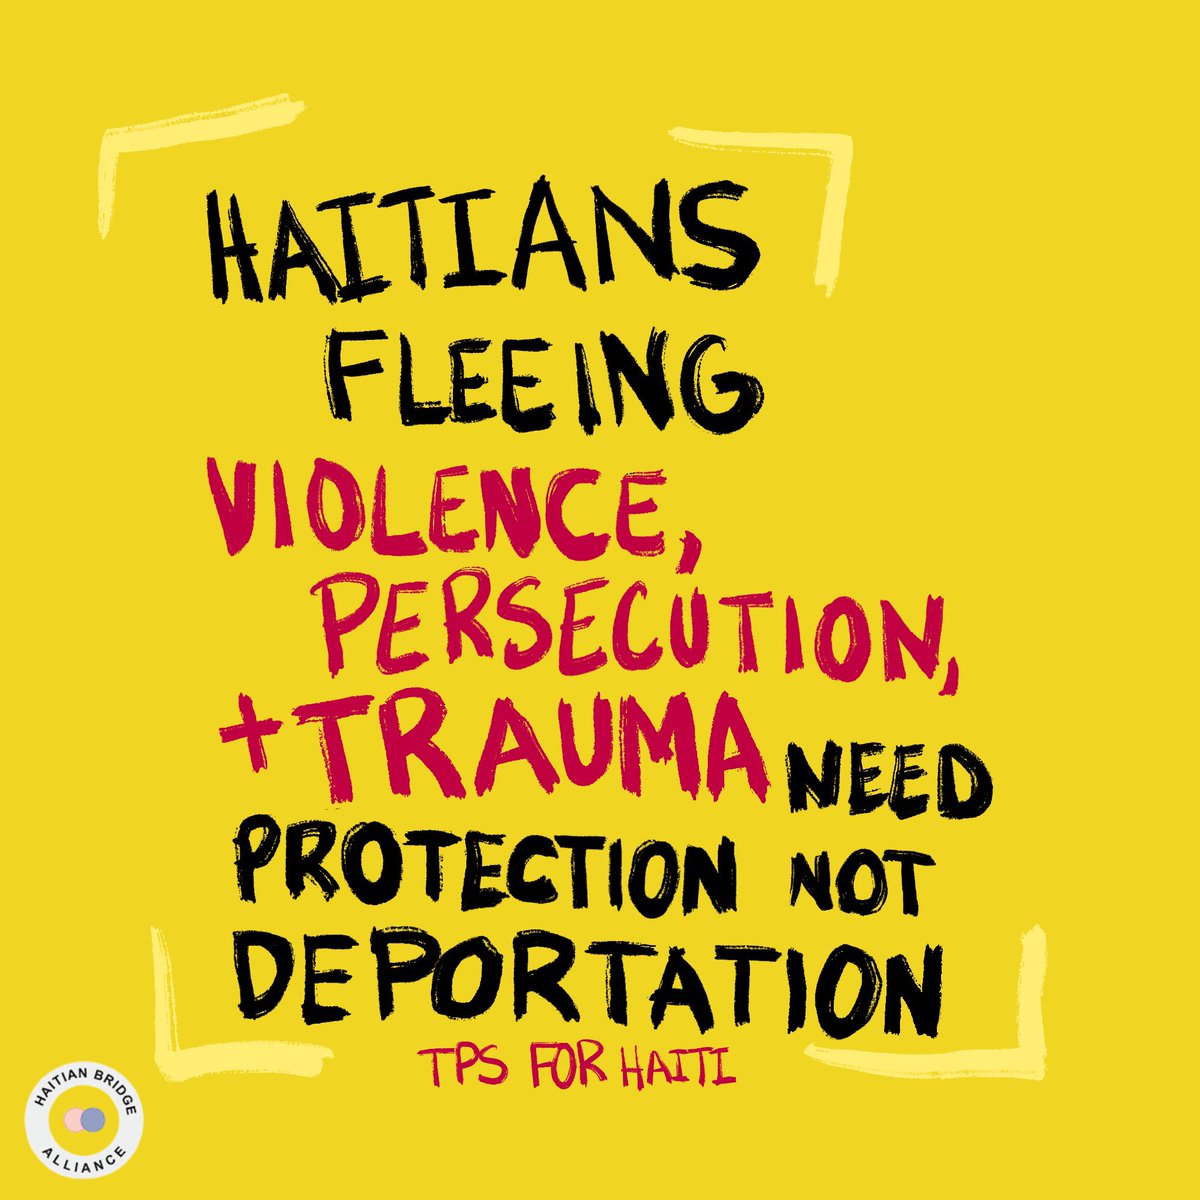 With rampant insecurity and violence driven by political and gang conflicts we are calling on the Biden administration to REDESIGNATE HAITI FOR TPS. @POTUS we urge you to be on the right side of history and to protect families #TPSFORHAITI.